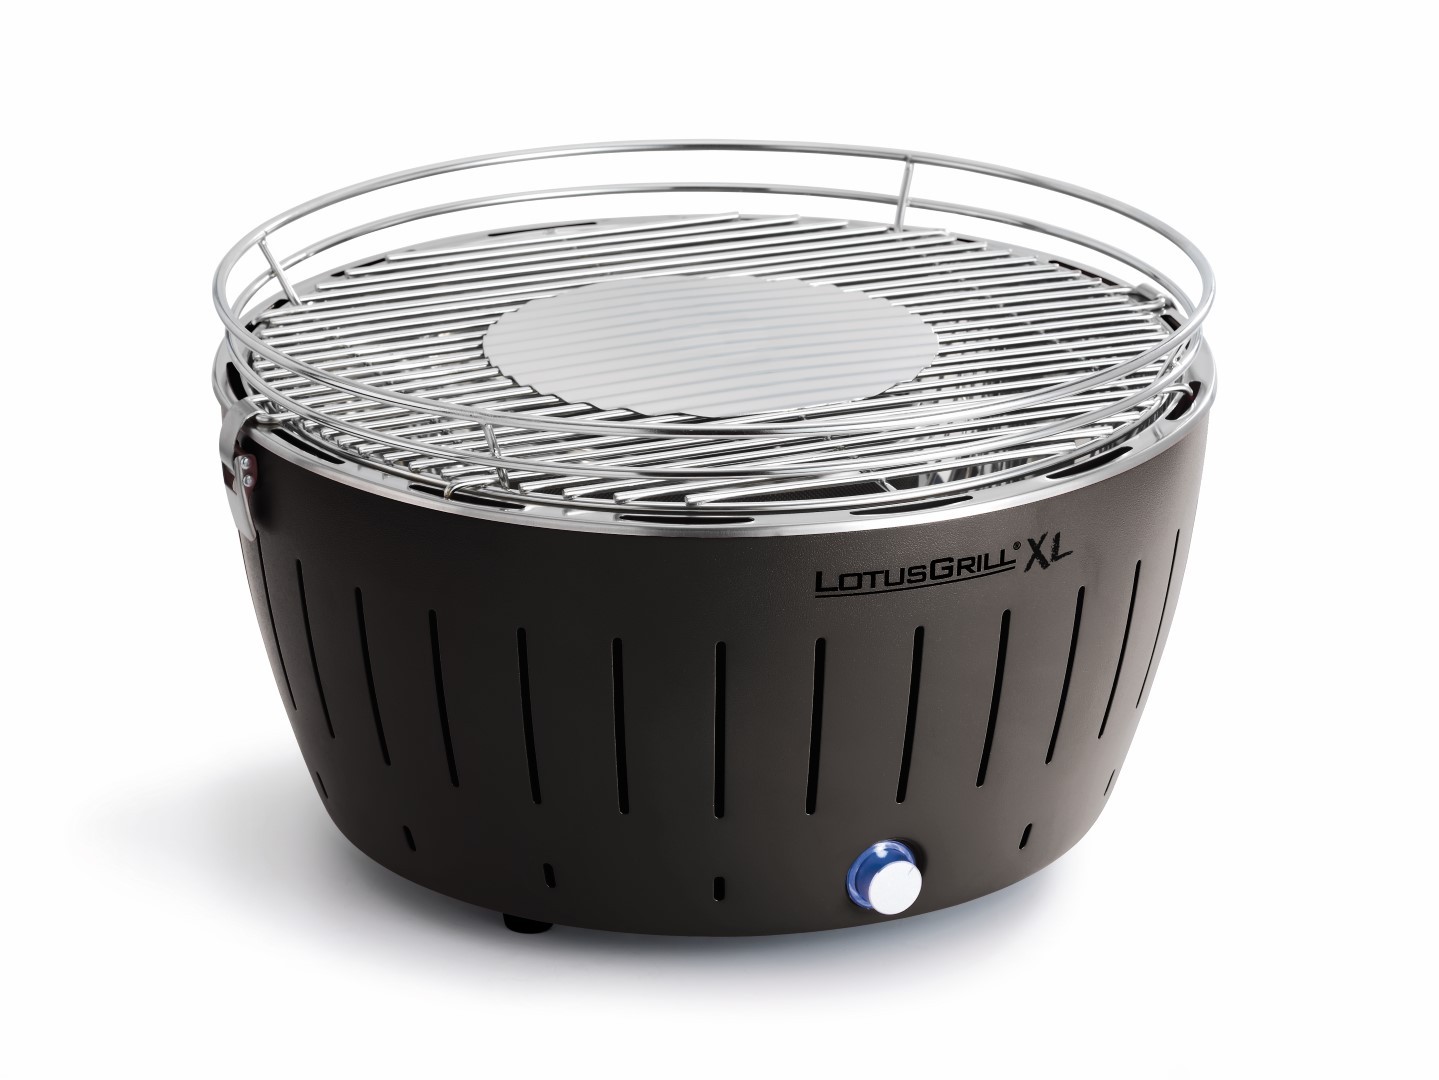 https://www.warentuin.nl/media/catalog/product/1/7/1774260023010059_2_lotusgrill_barbecue_barbecue_xl_antraciet_o_435_mm_lotusgril_7e9e.jpg